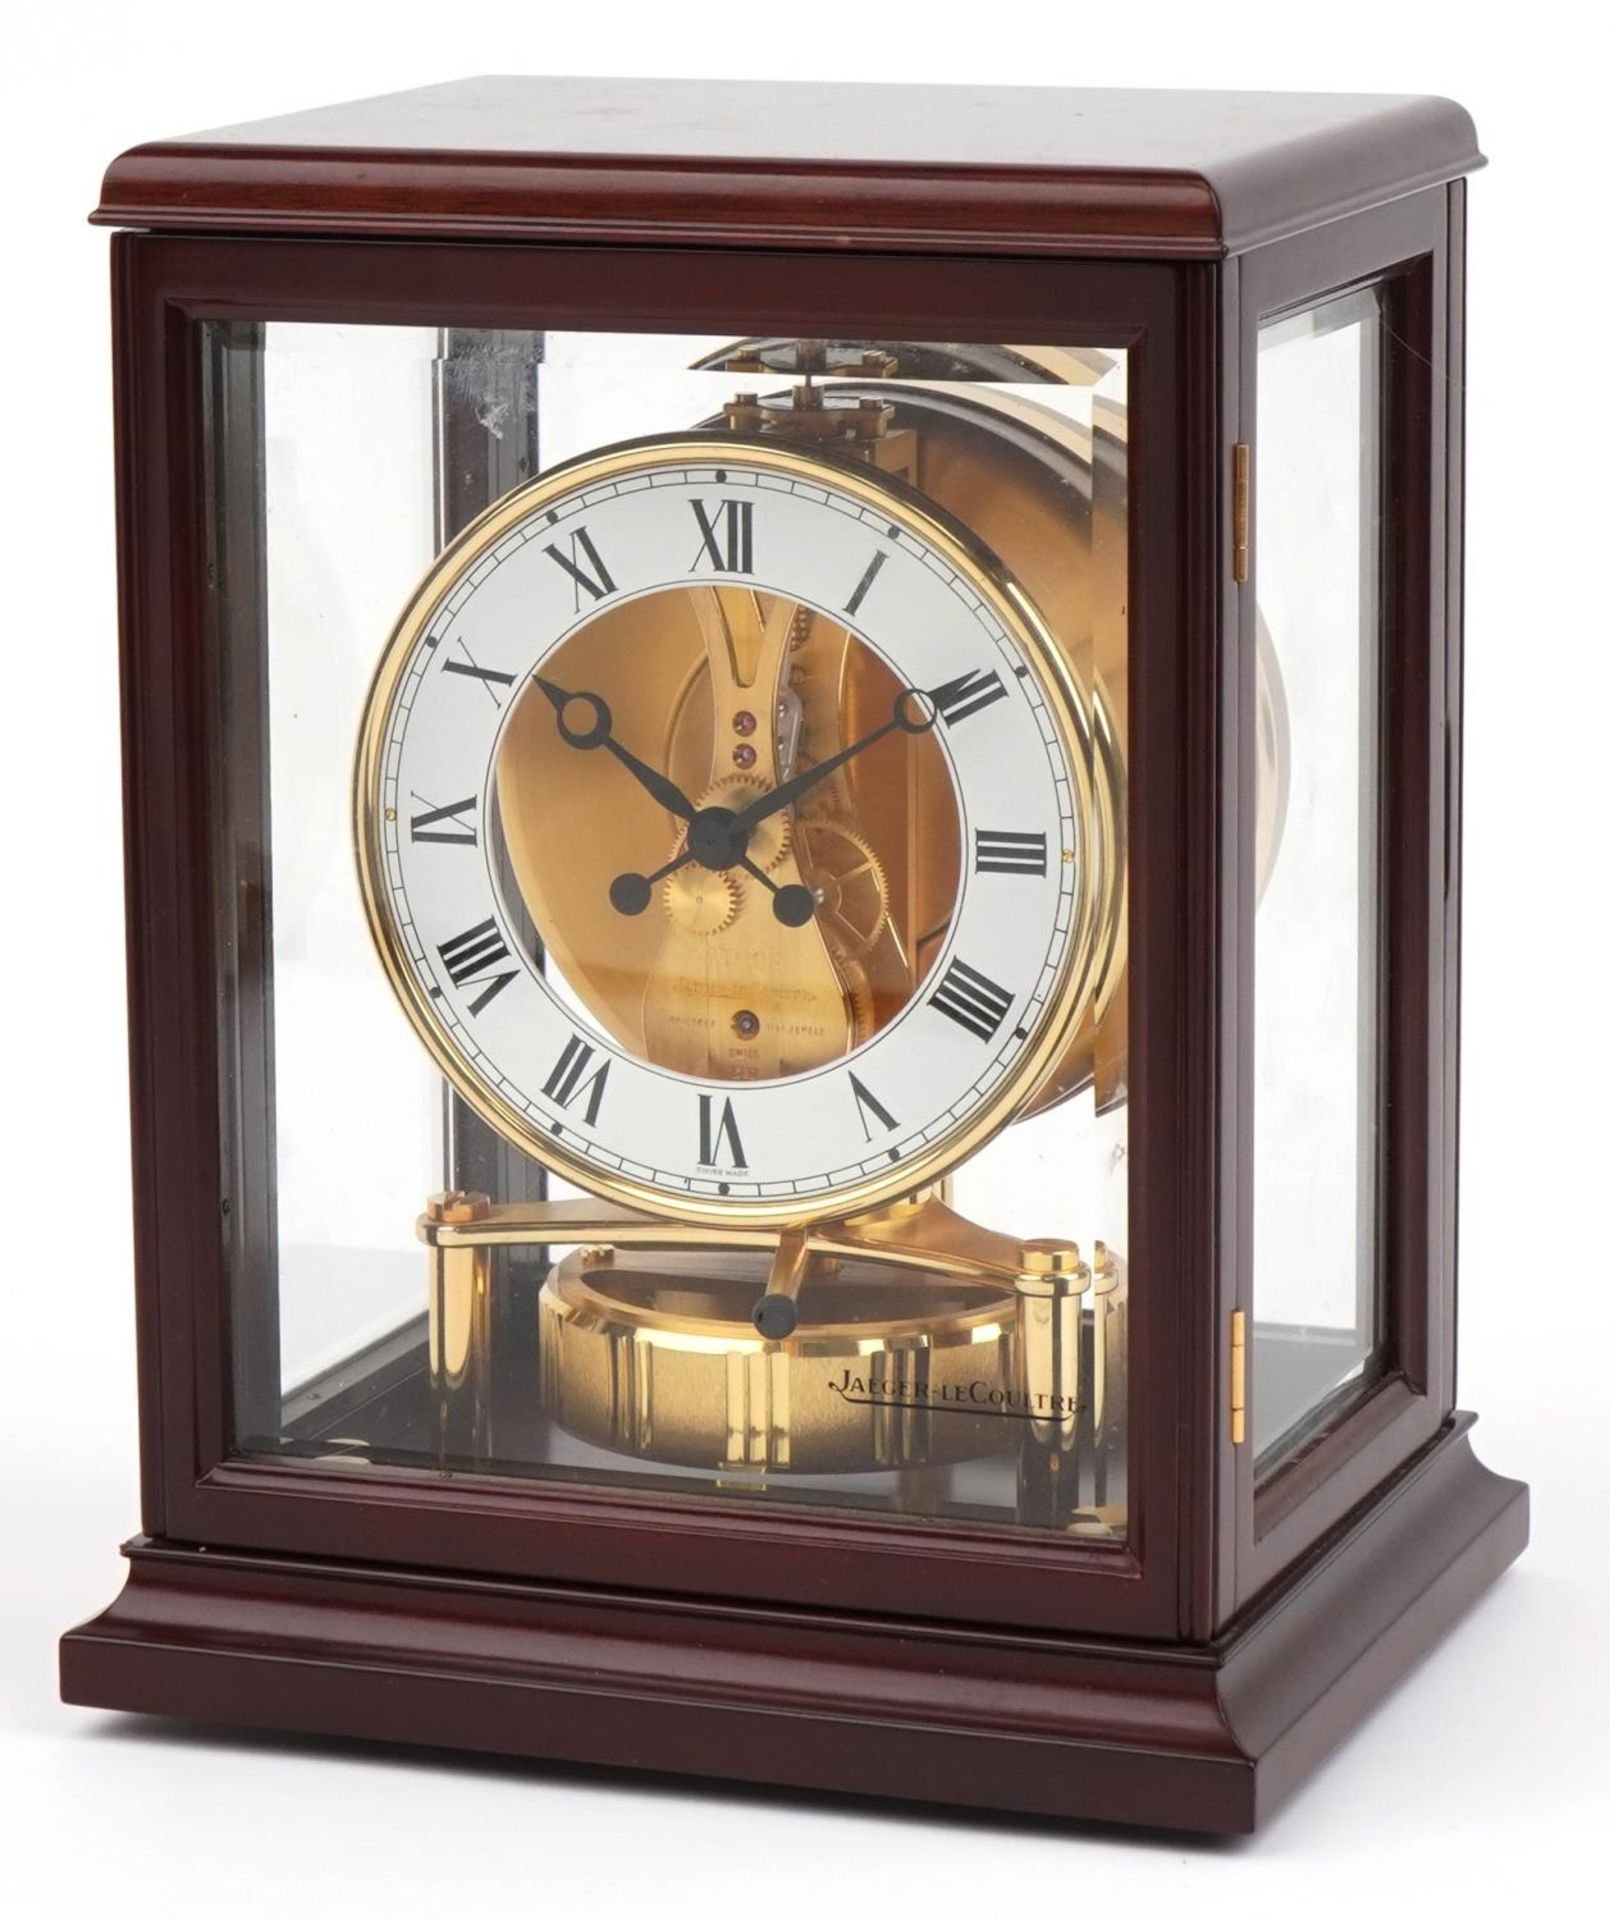 Jaeger LeCoultre, Atmos clock housed in a glazed mahogany case with bevelled glass with Asprey's box - Image 2 of 7